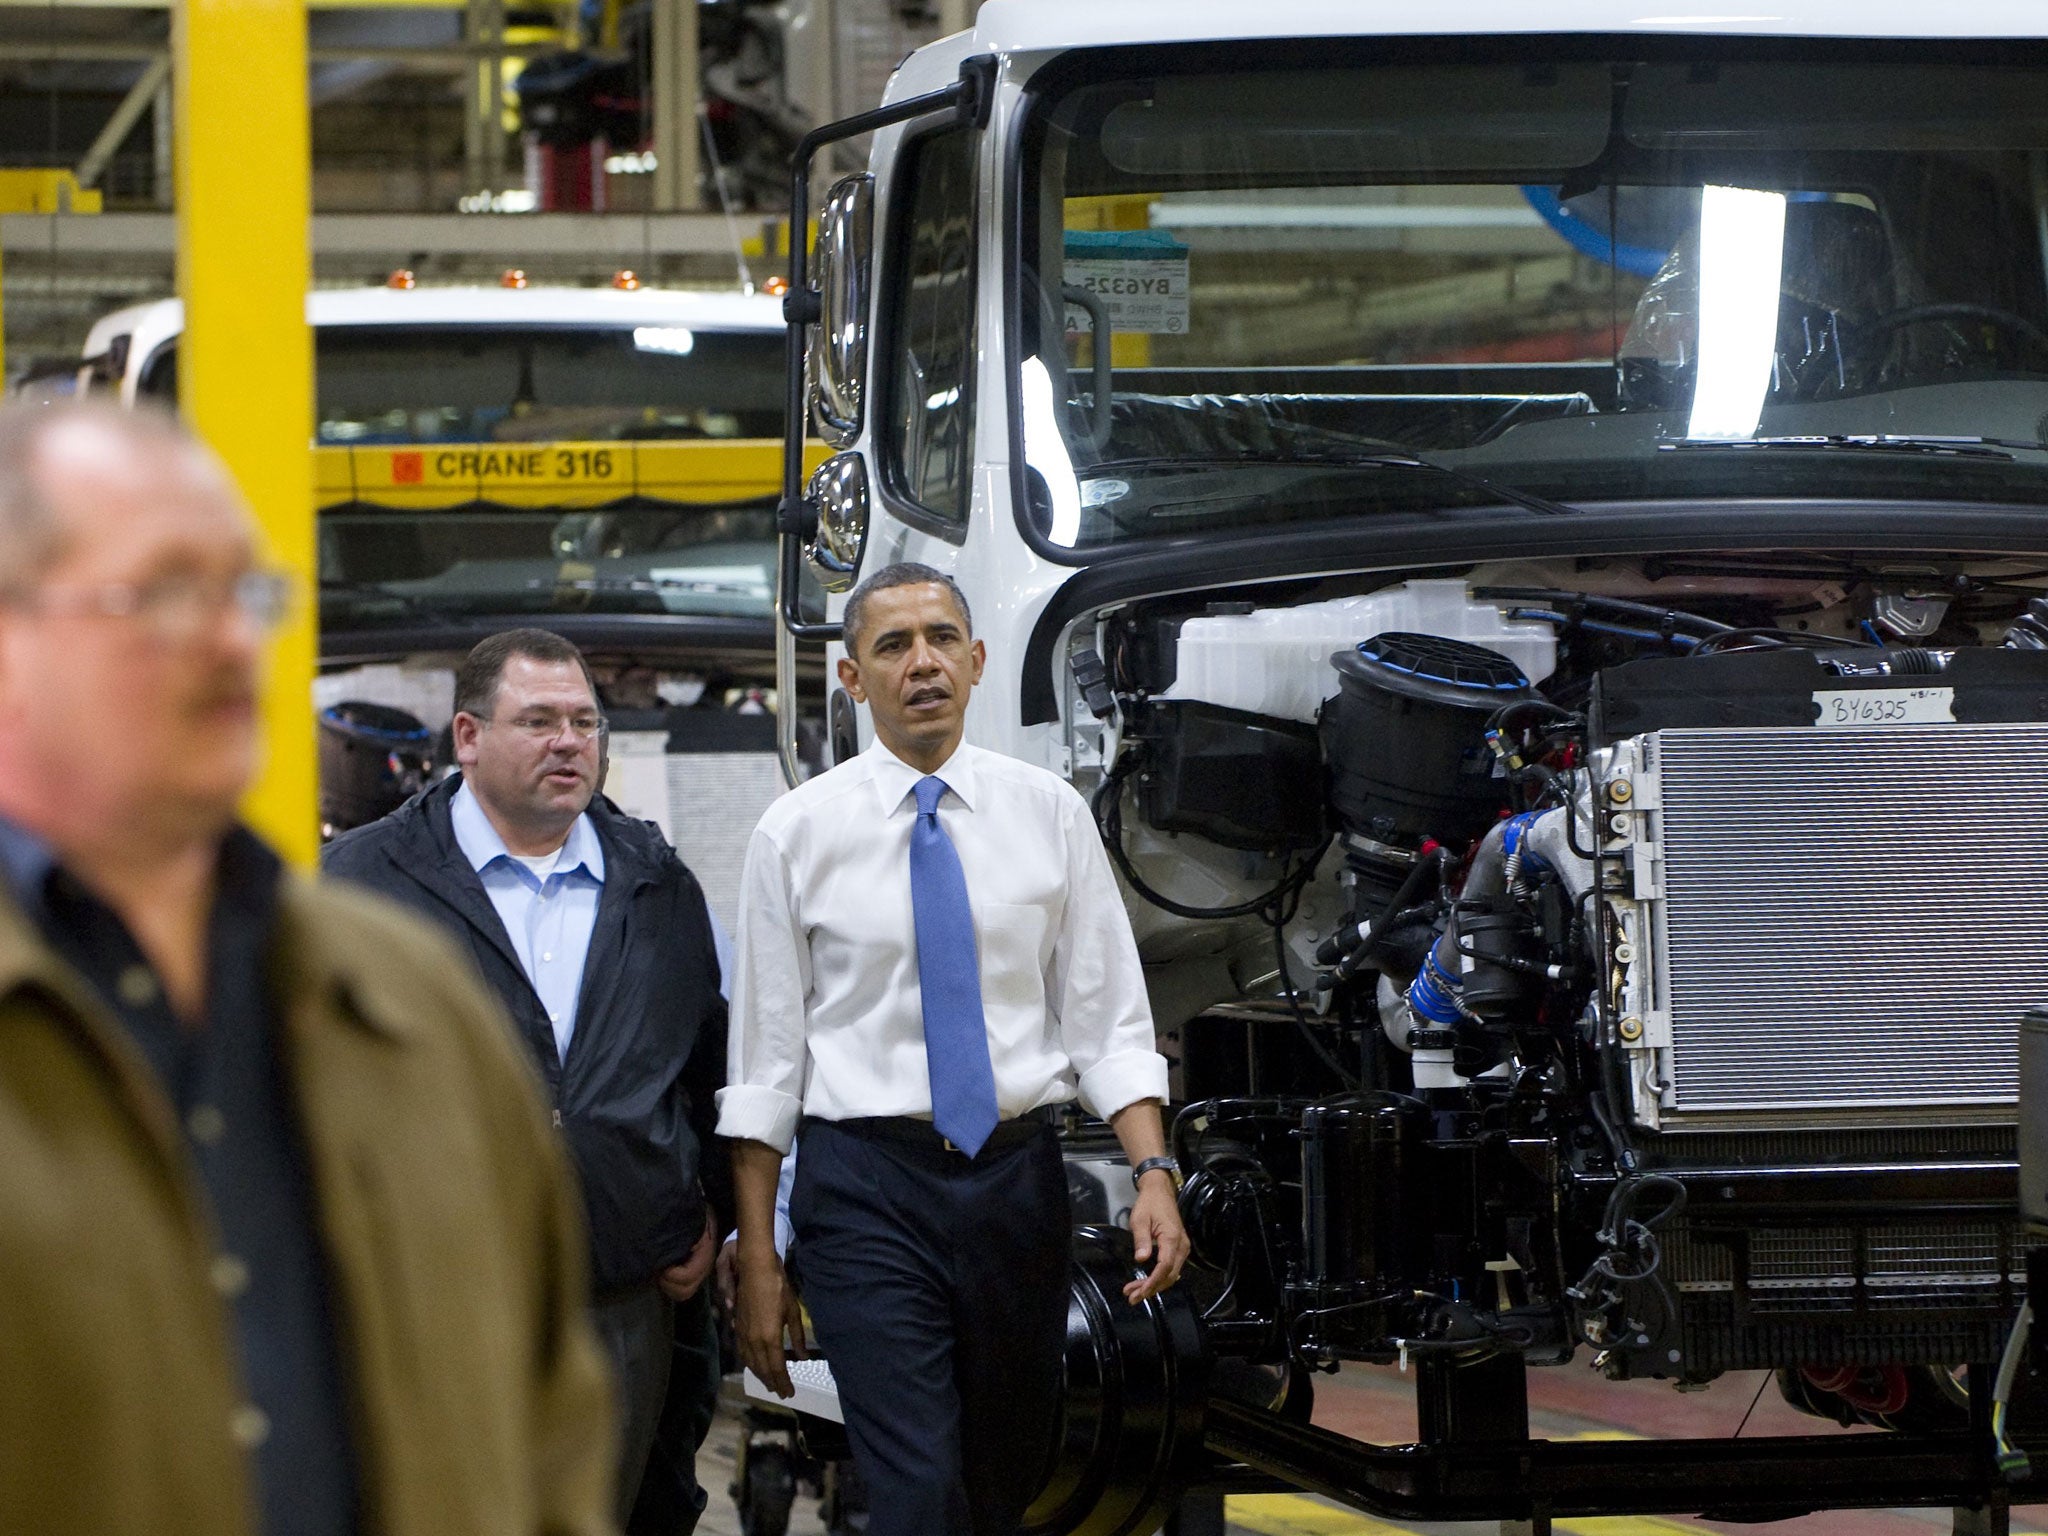 President Obama, here touring a truck factory, will soon have to turn his attention to the US economy